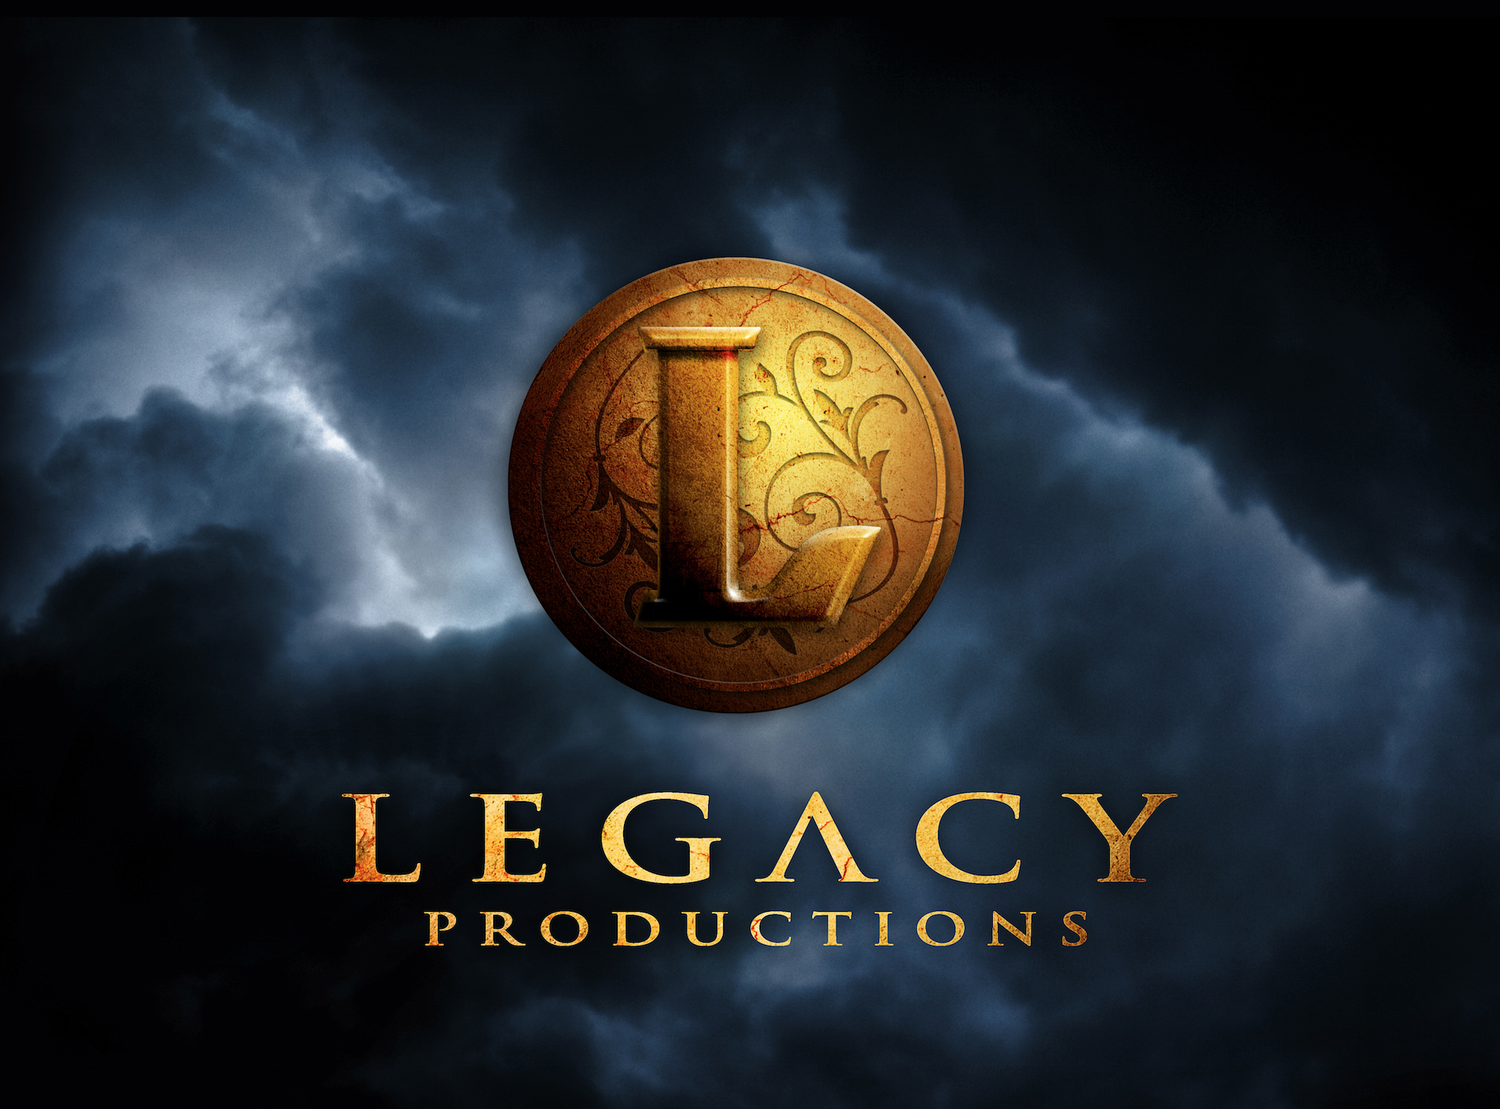 LEGACY PRODUCTIONS